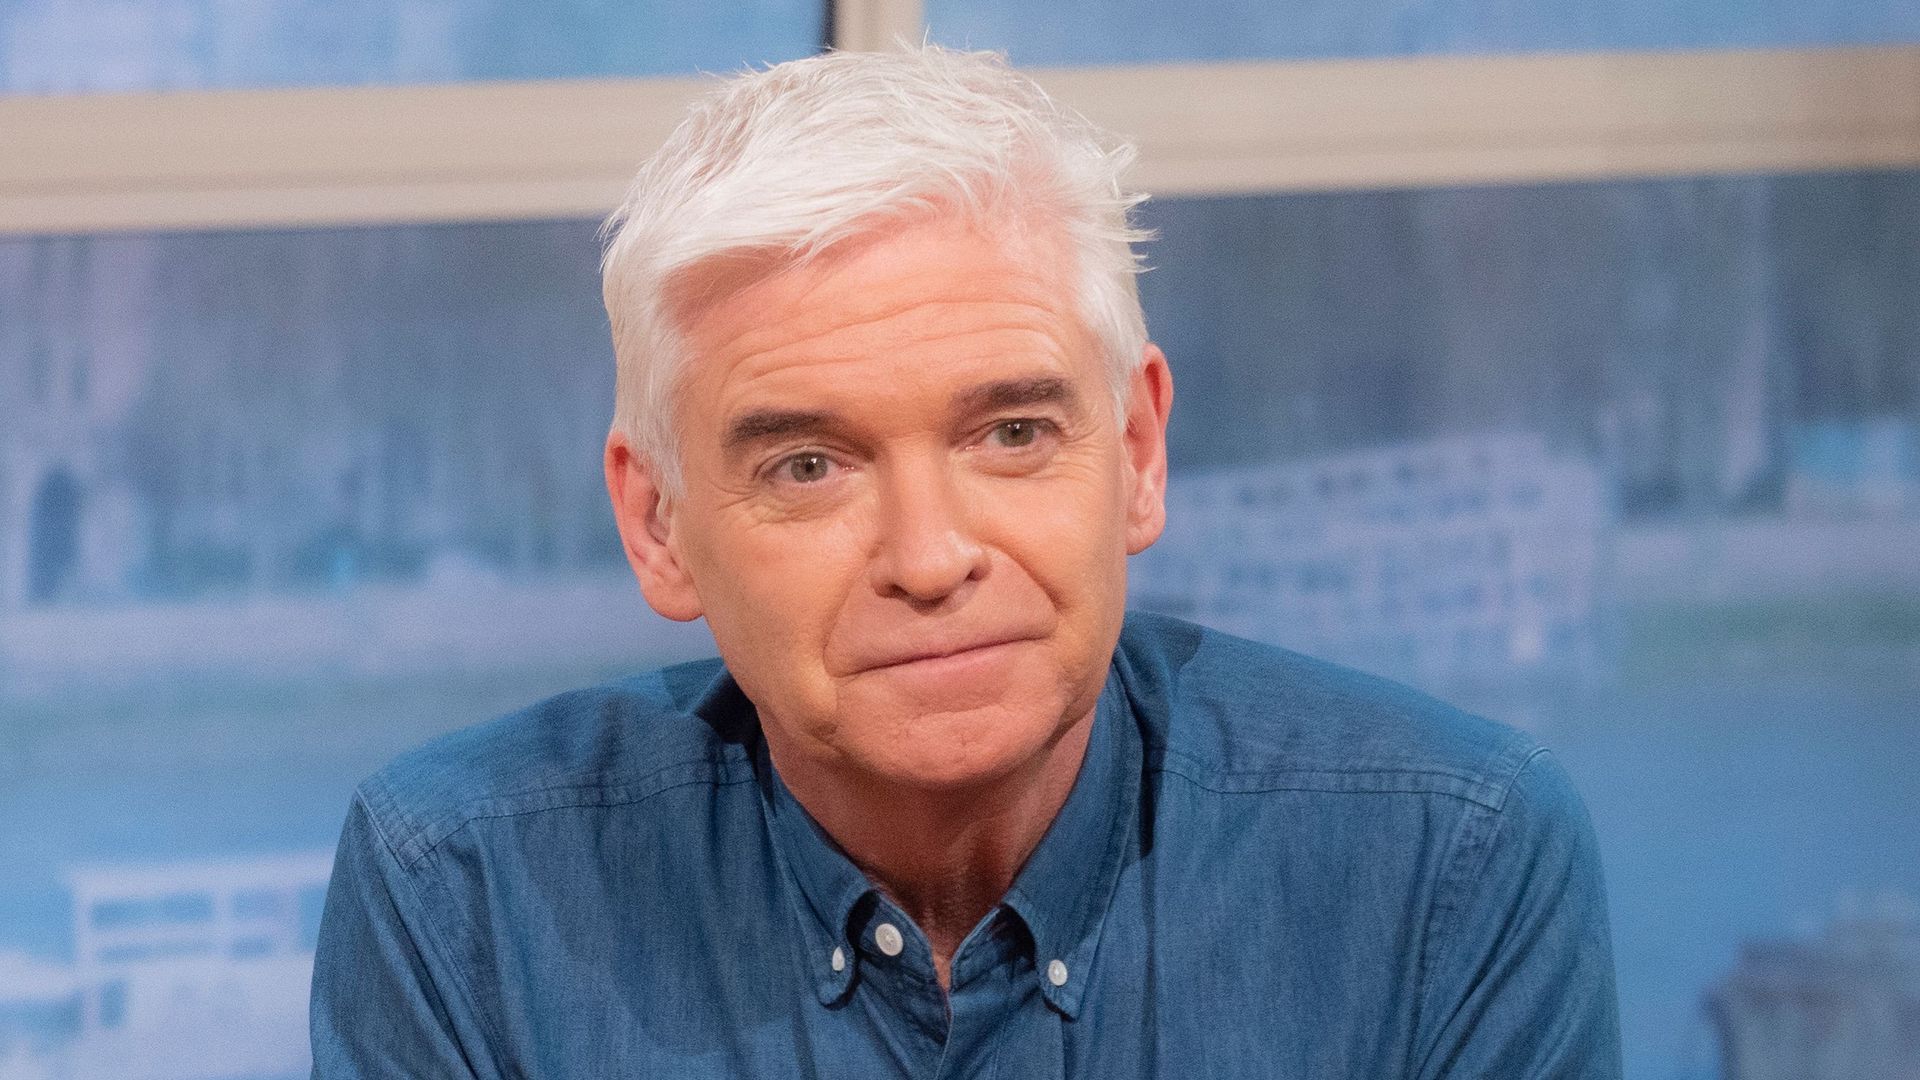 Phillip Schofield wears a denim shirt on This Morning